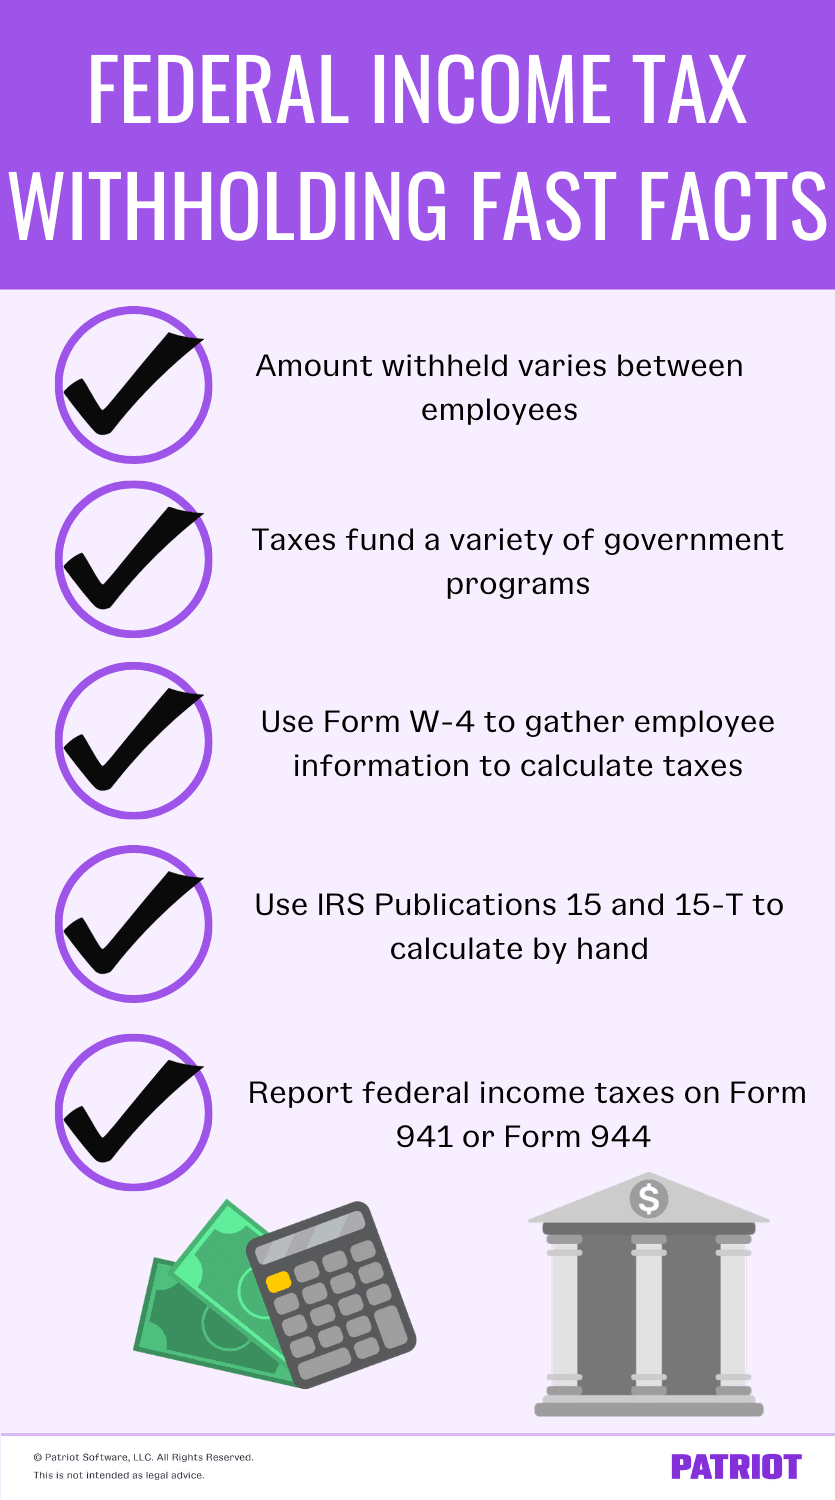 Federal income tax withholding fast facts. Amount withheld varies between employees. Taxes fund a variety of government programs. Use Form W-4 to gather employee information to calculate taxes. Use IRS Publication 15 and 15-T to calculate by hand. Report federal income taxes on Form 941 or Form 944. 